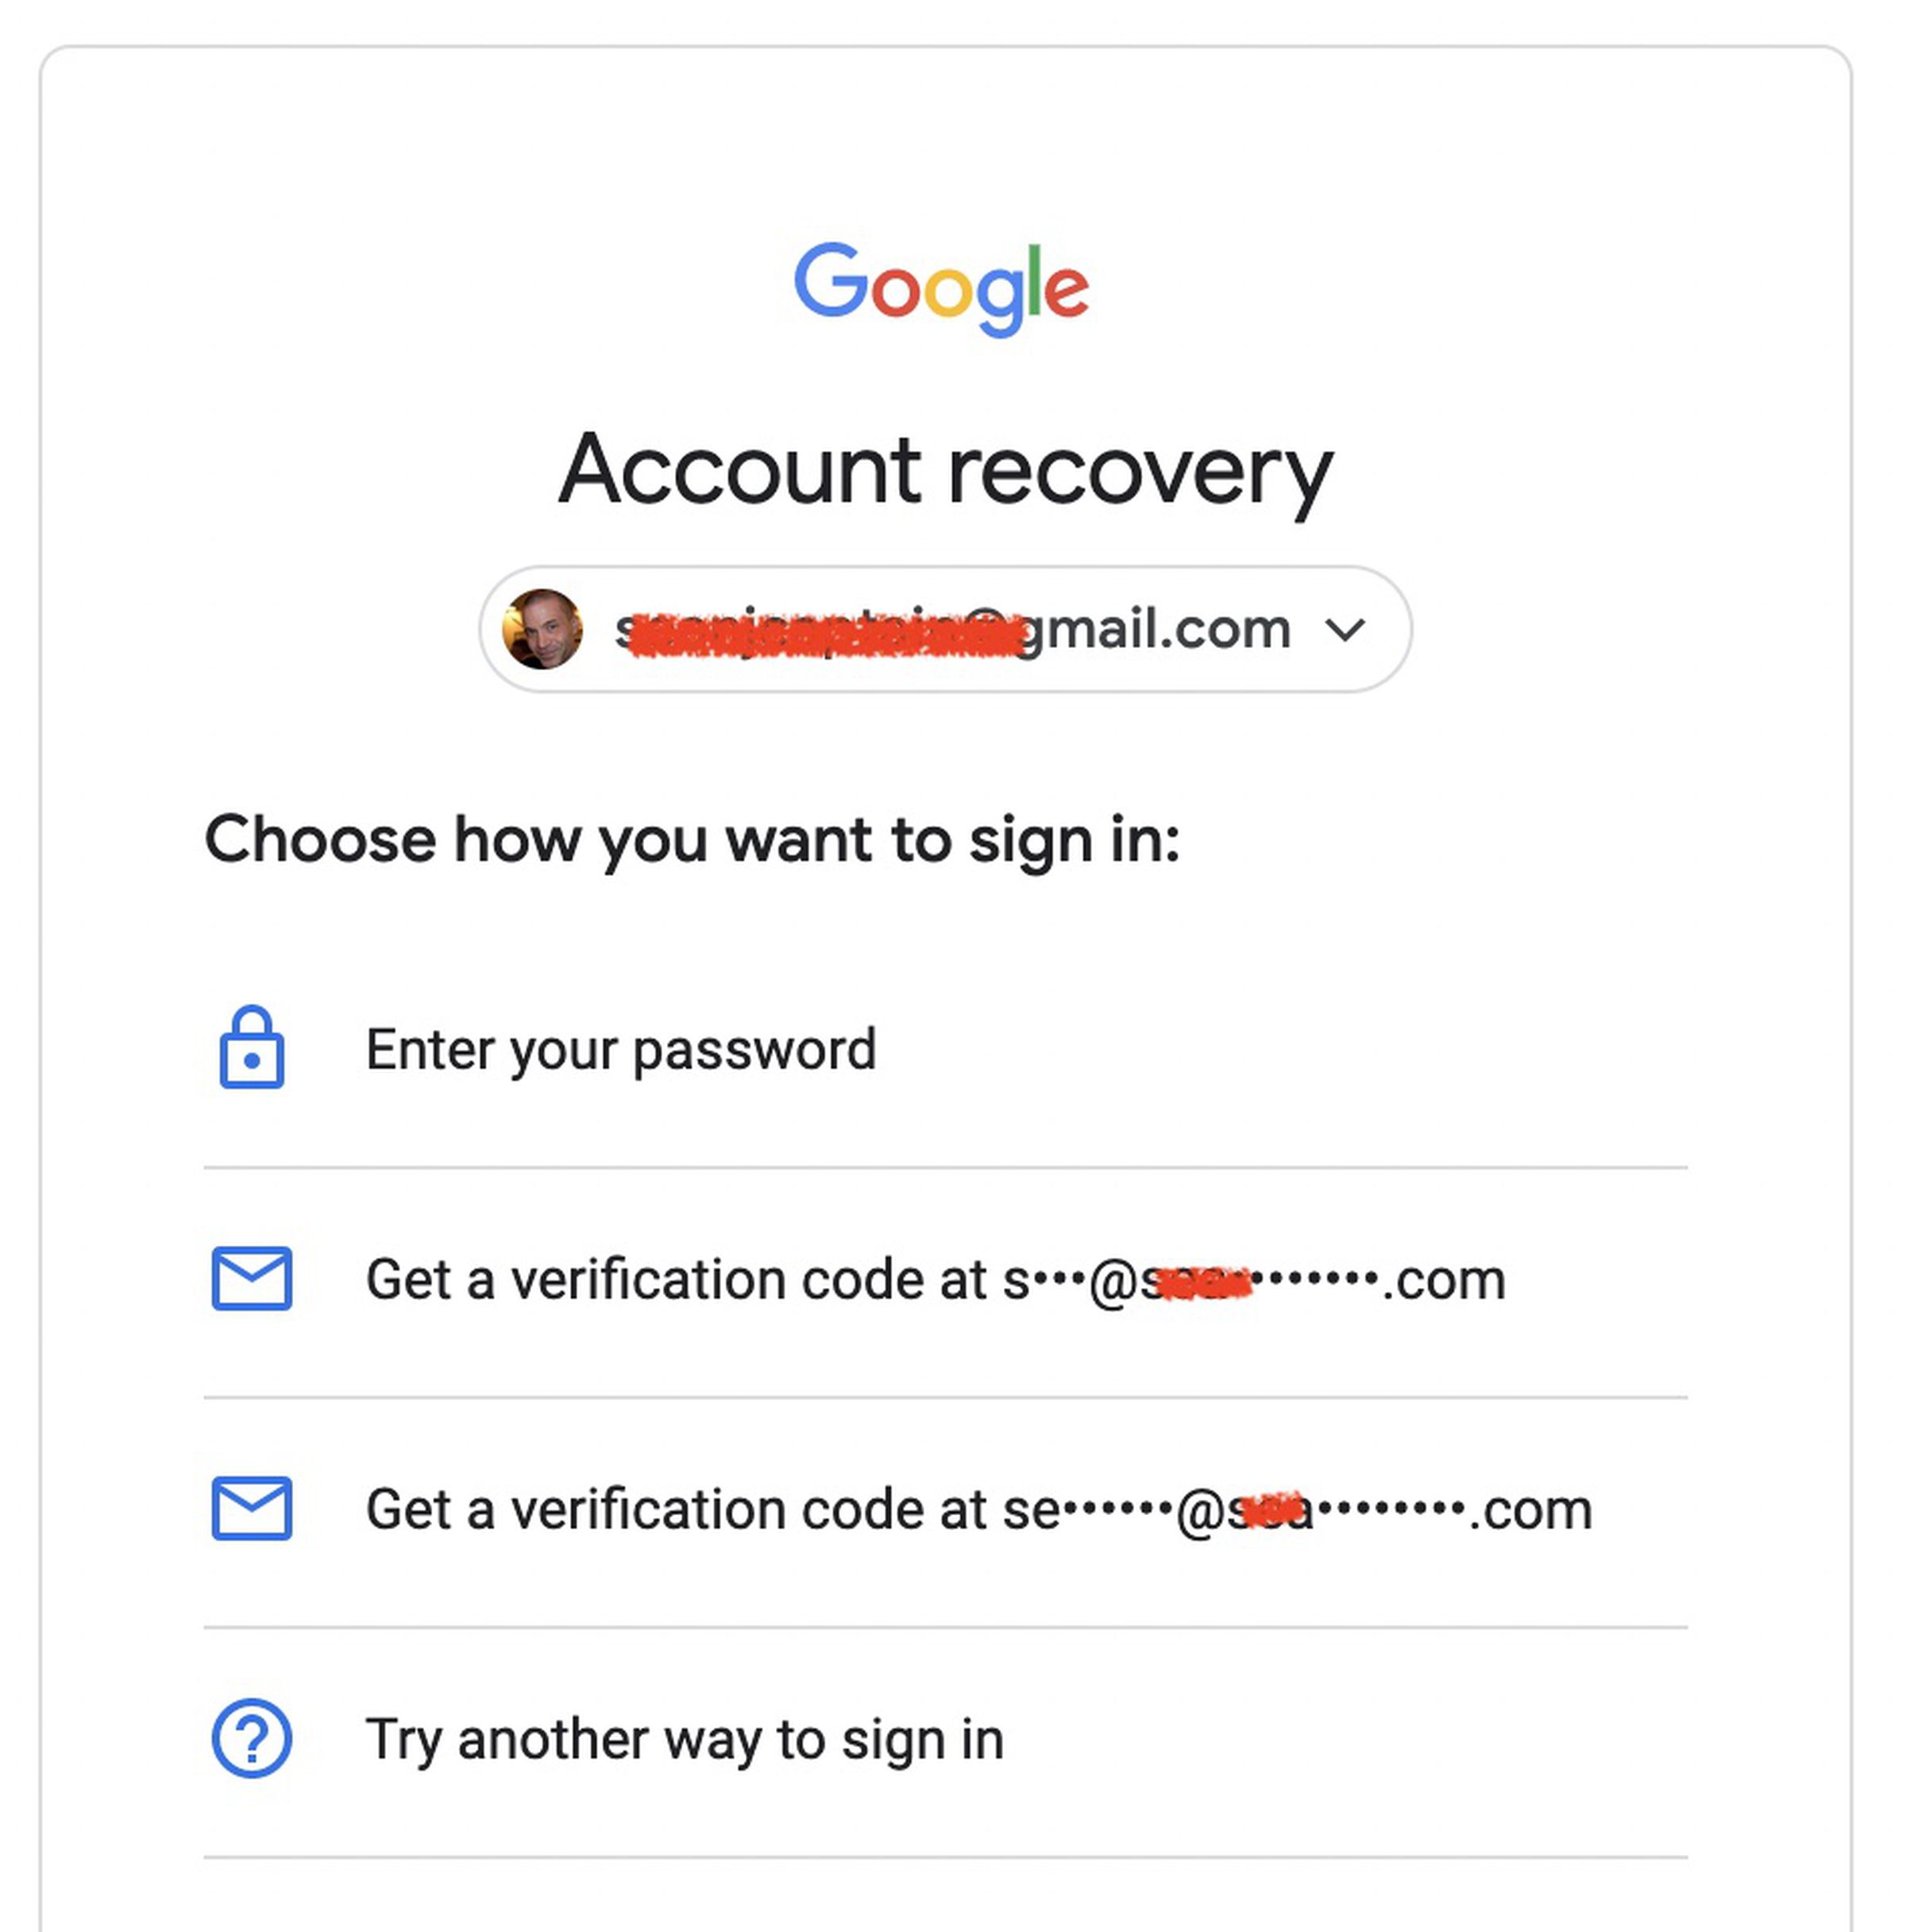 Google offers a number of options to verify yourself for account recovery.